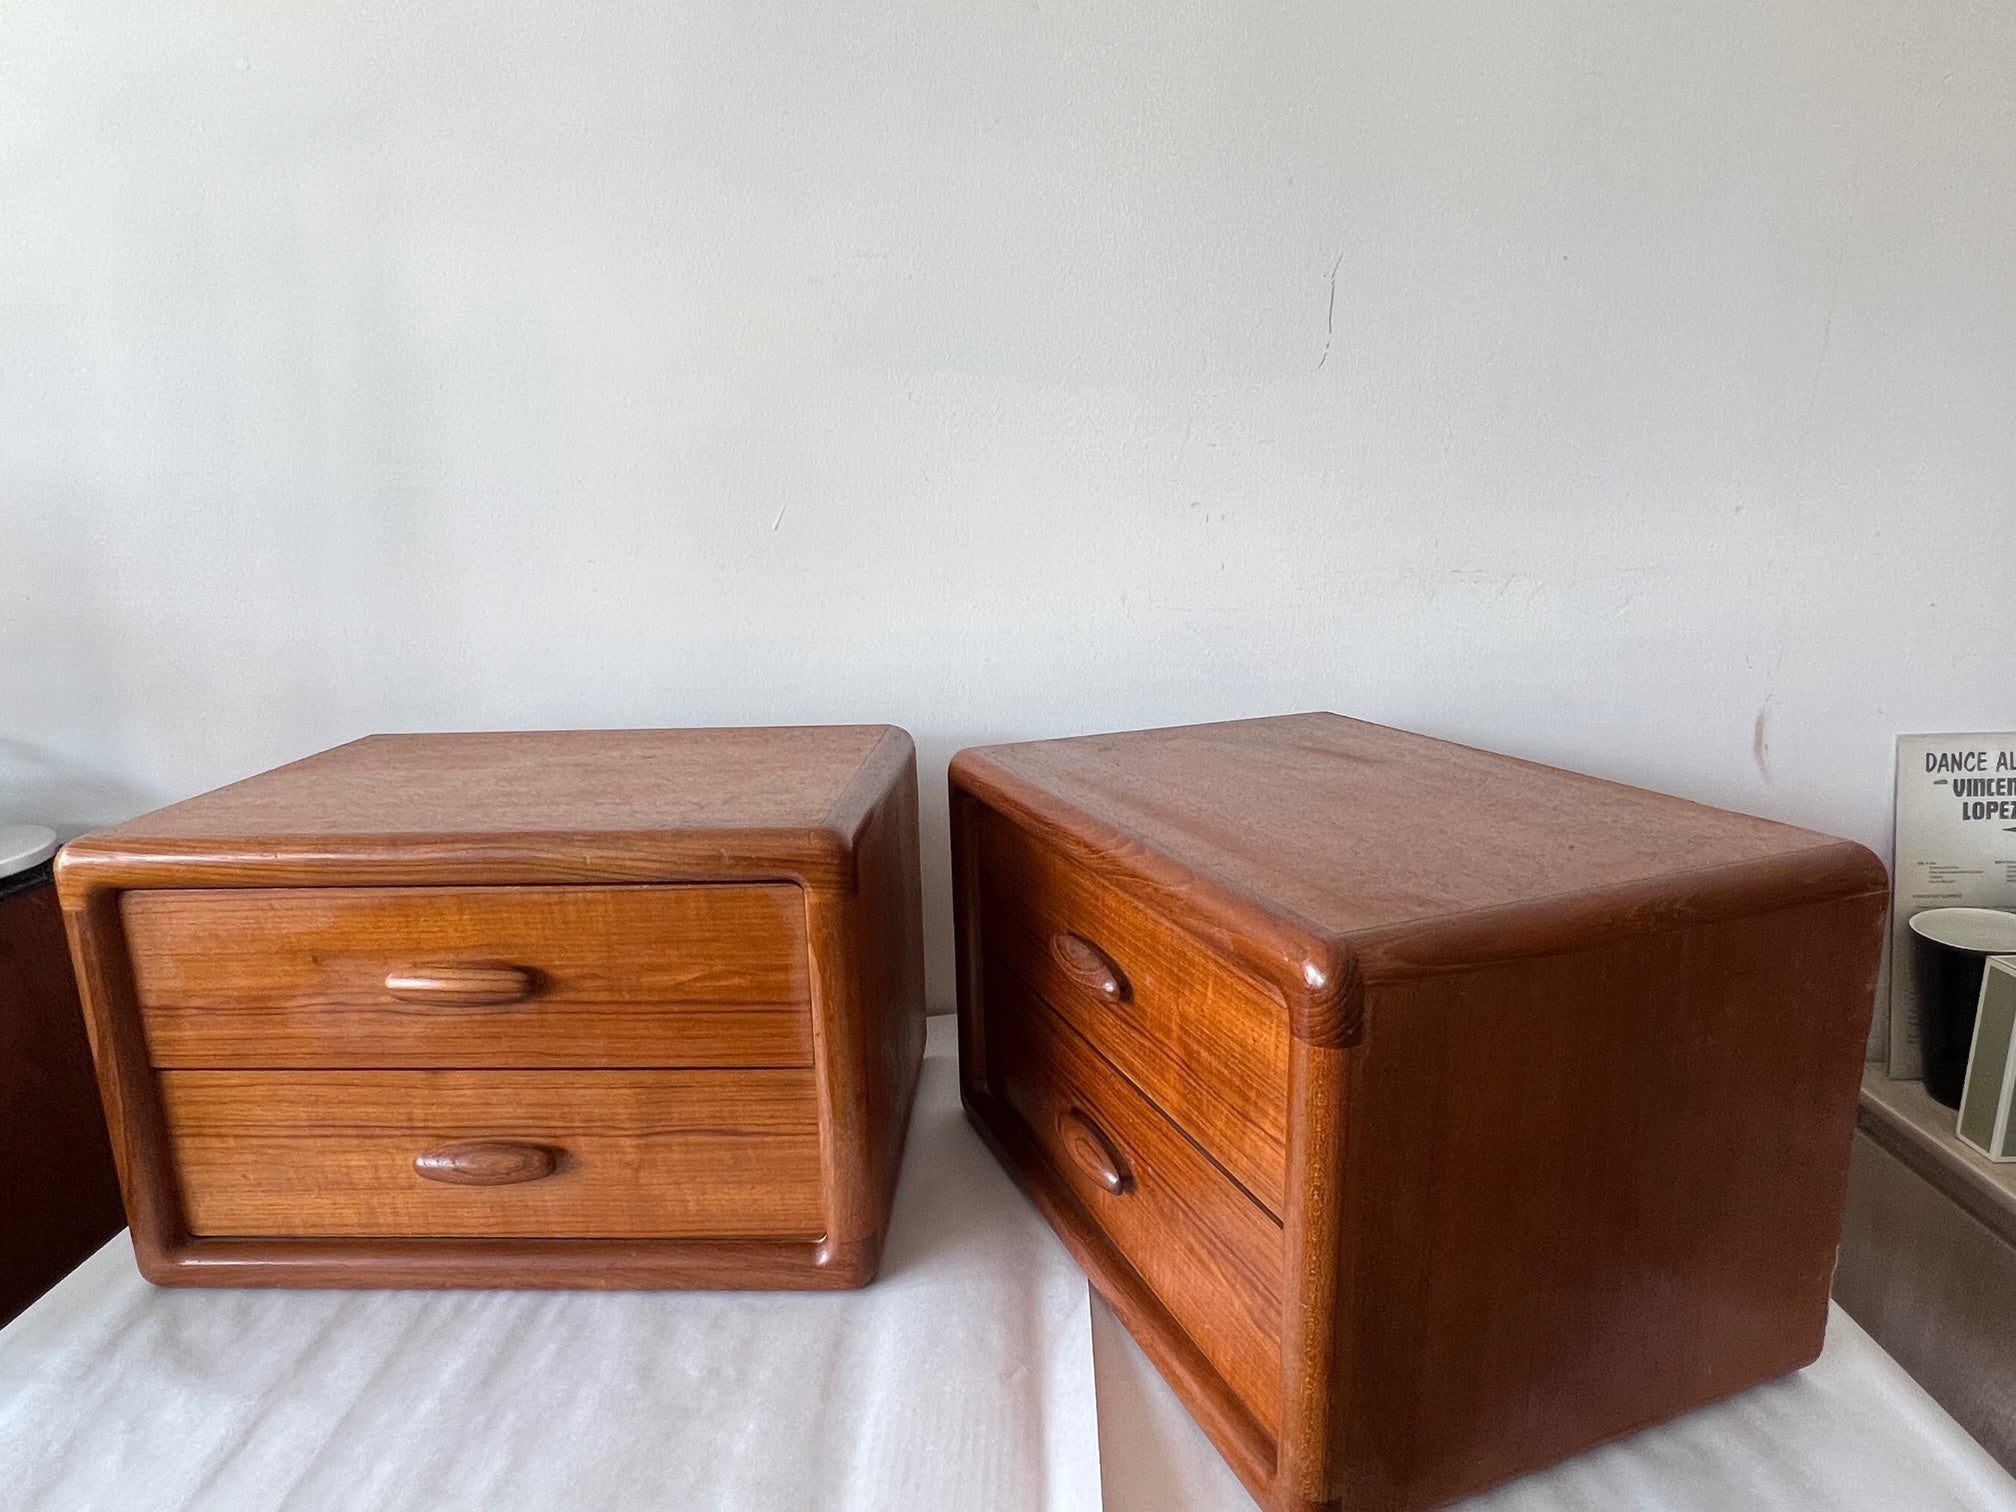 A pair of Danish modern drawers by Dyrlund, circa 1970s. No legs-these are small drawers, that can be stacked or used separately. Sculptural, solid teak handles.